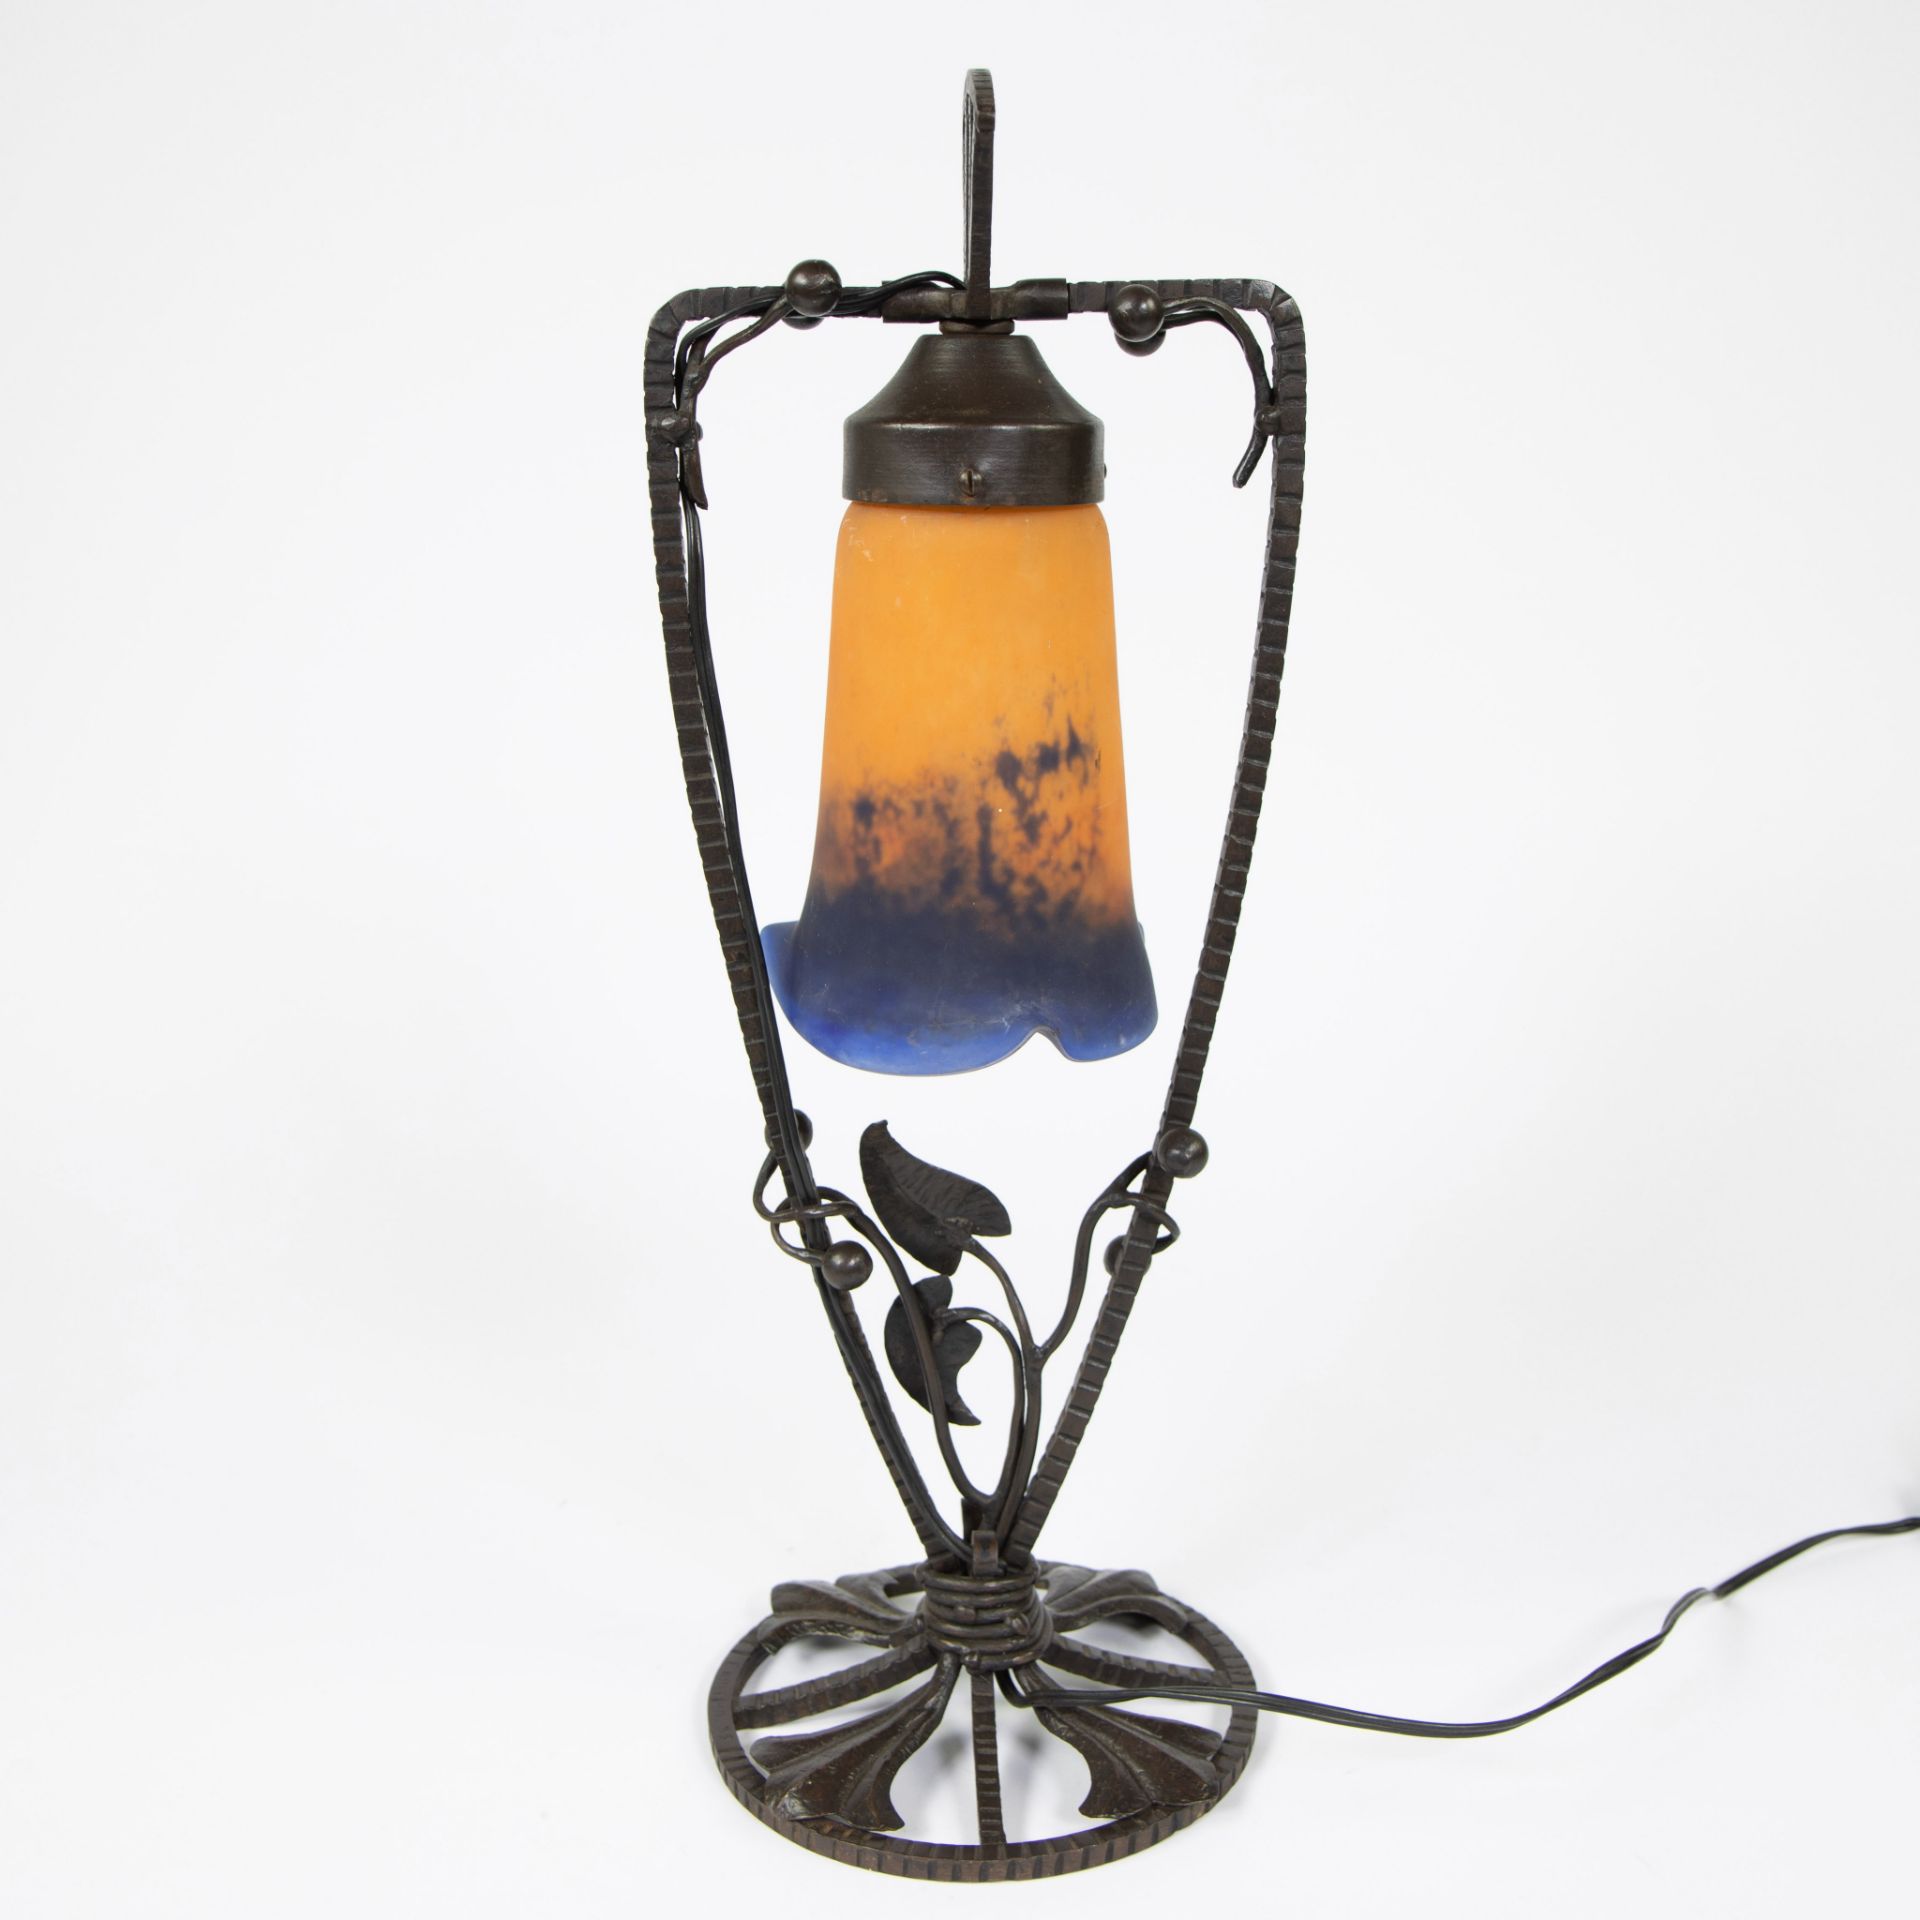 Noverdy table lamp France, wrought iron and glass shade with melted colour powders, signed. - Image 4 of 5